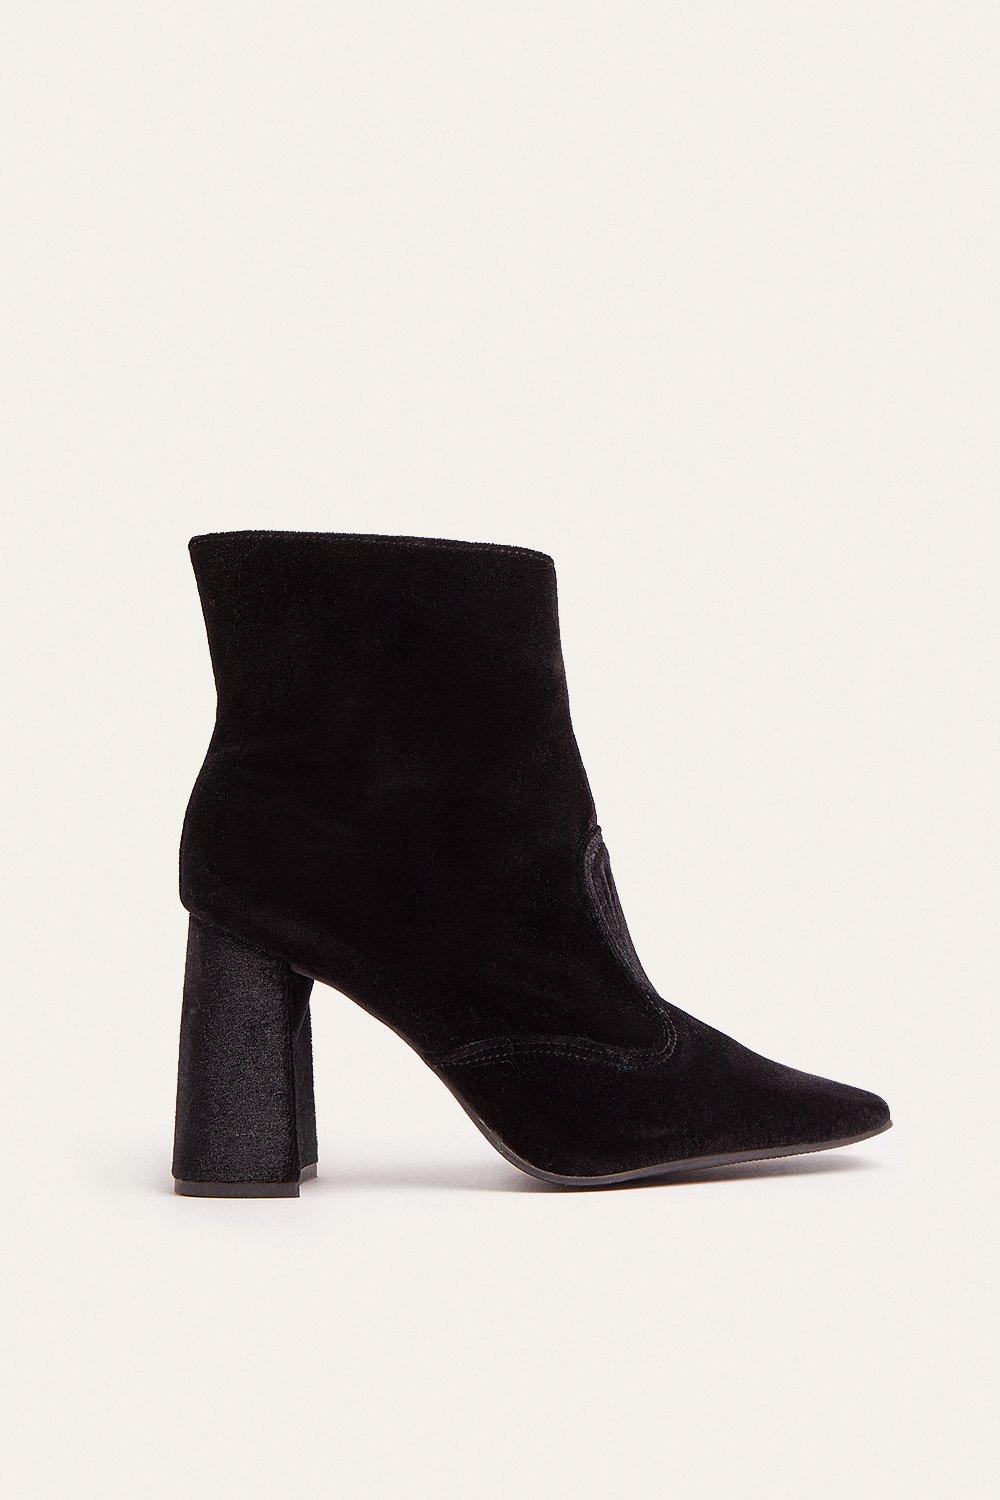 oasis millie high ankle boot